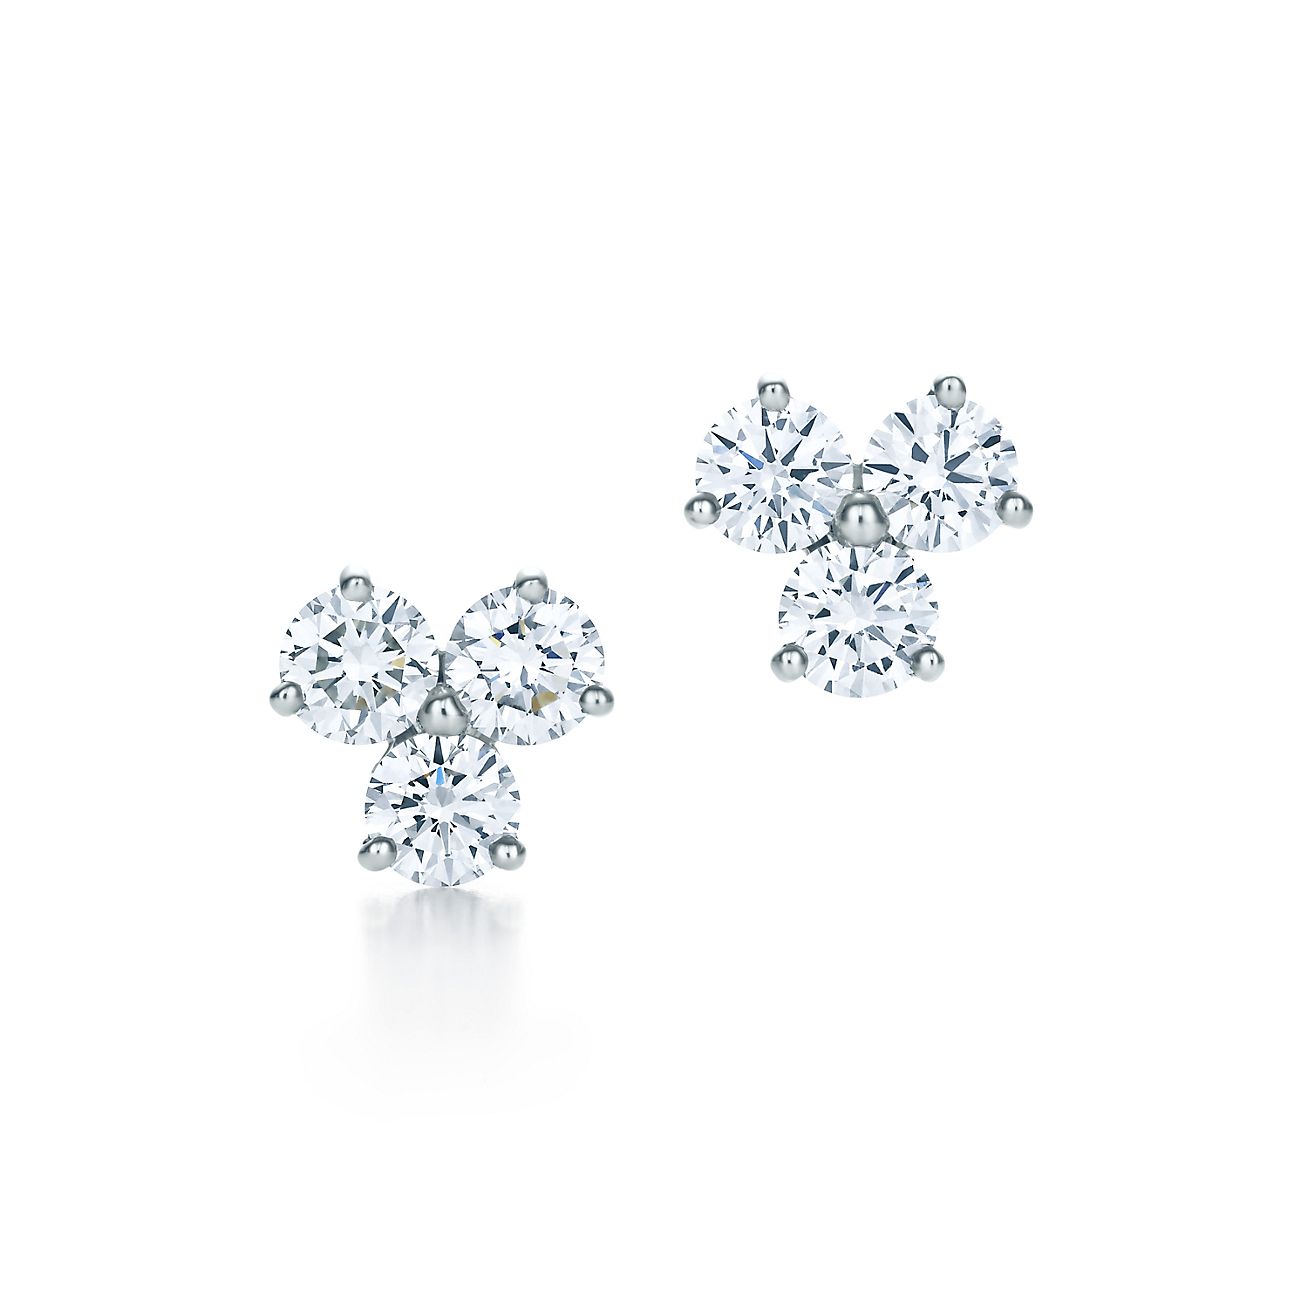 Tiffany Aria earrings in platinum with 